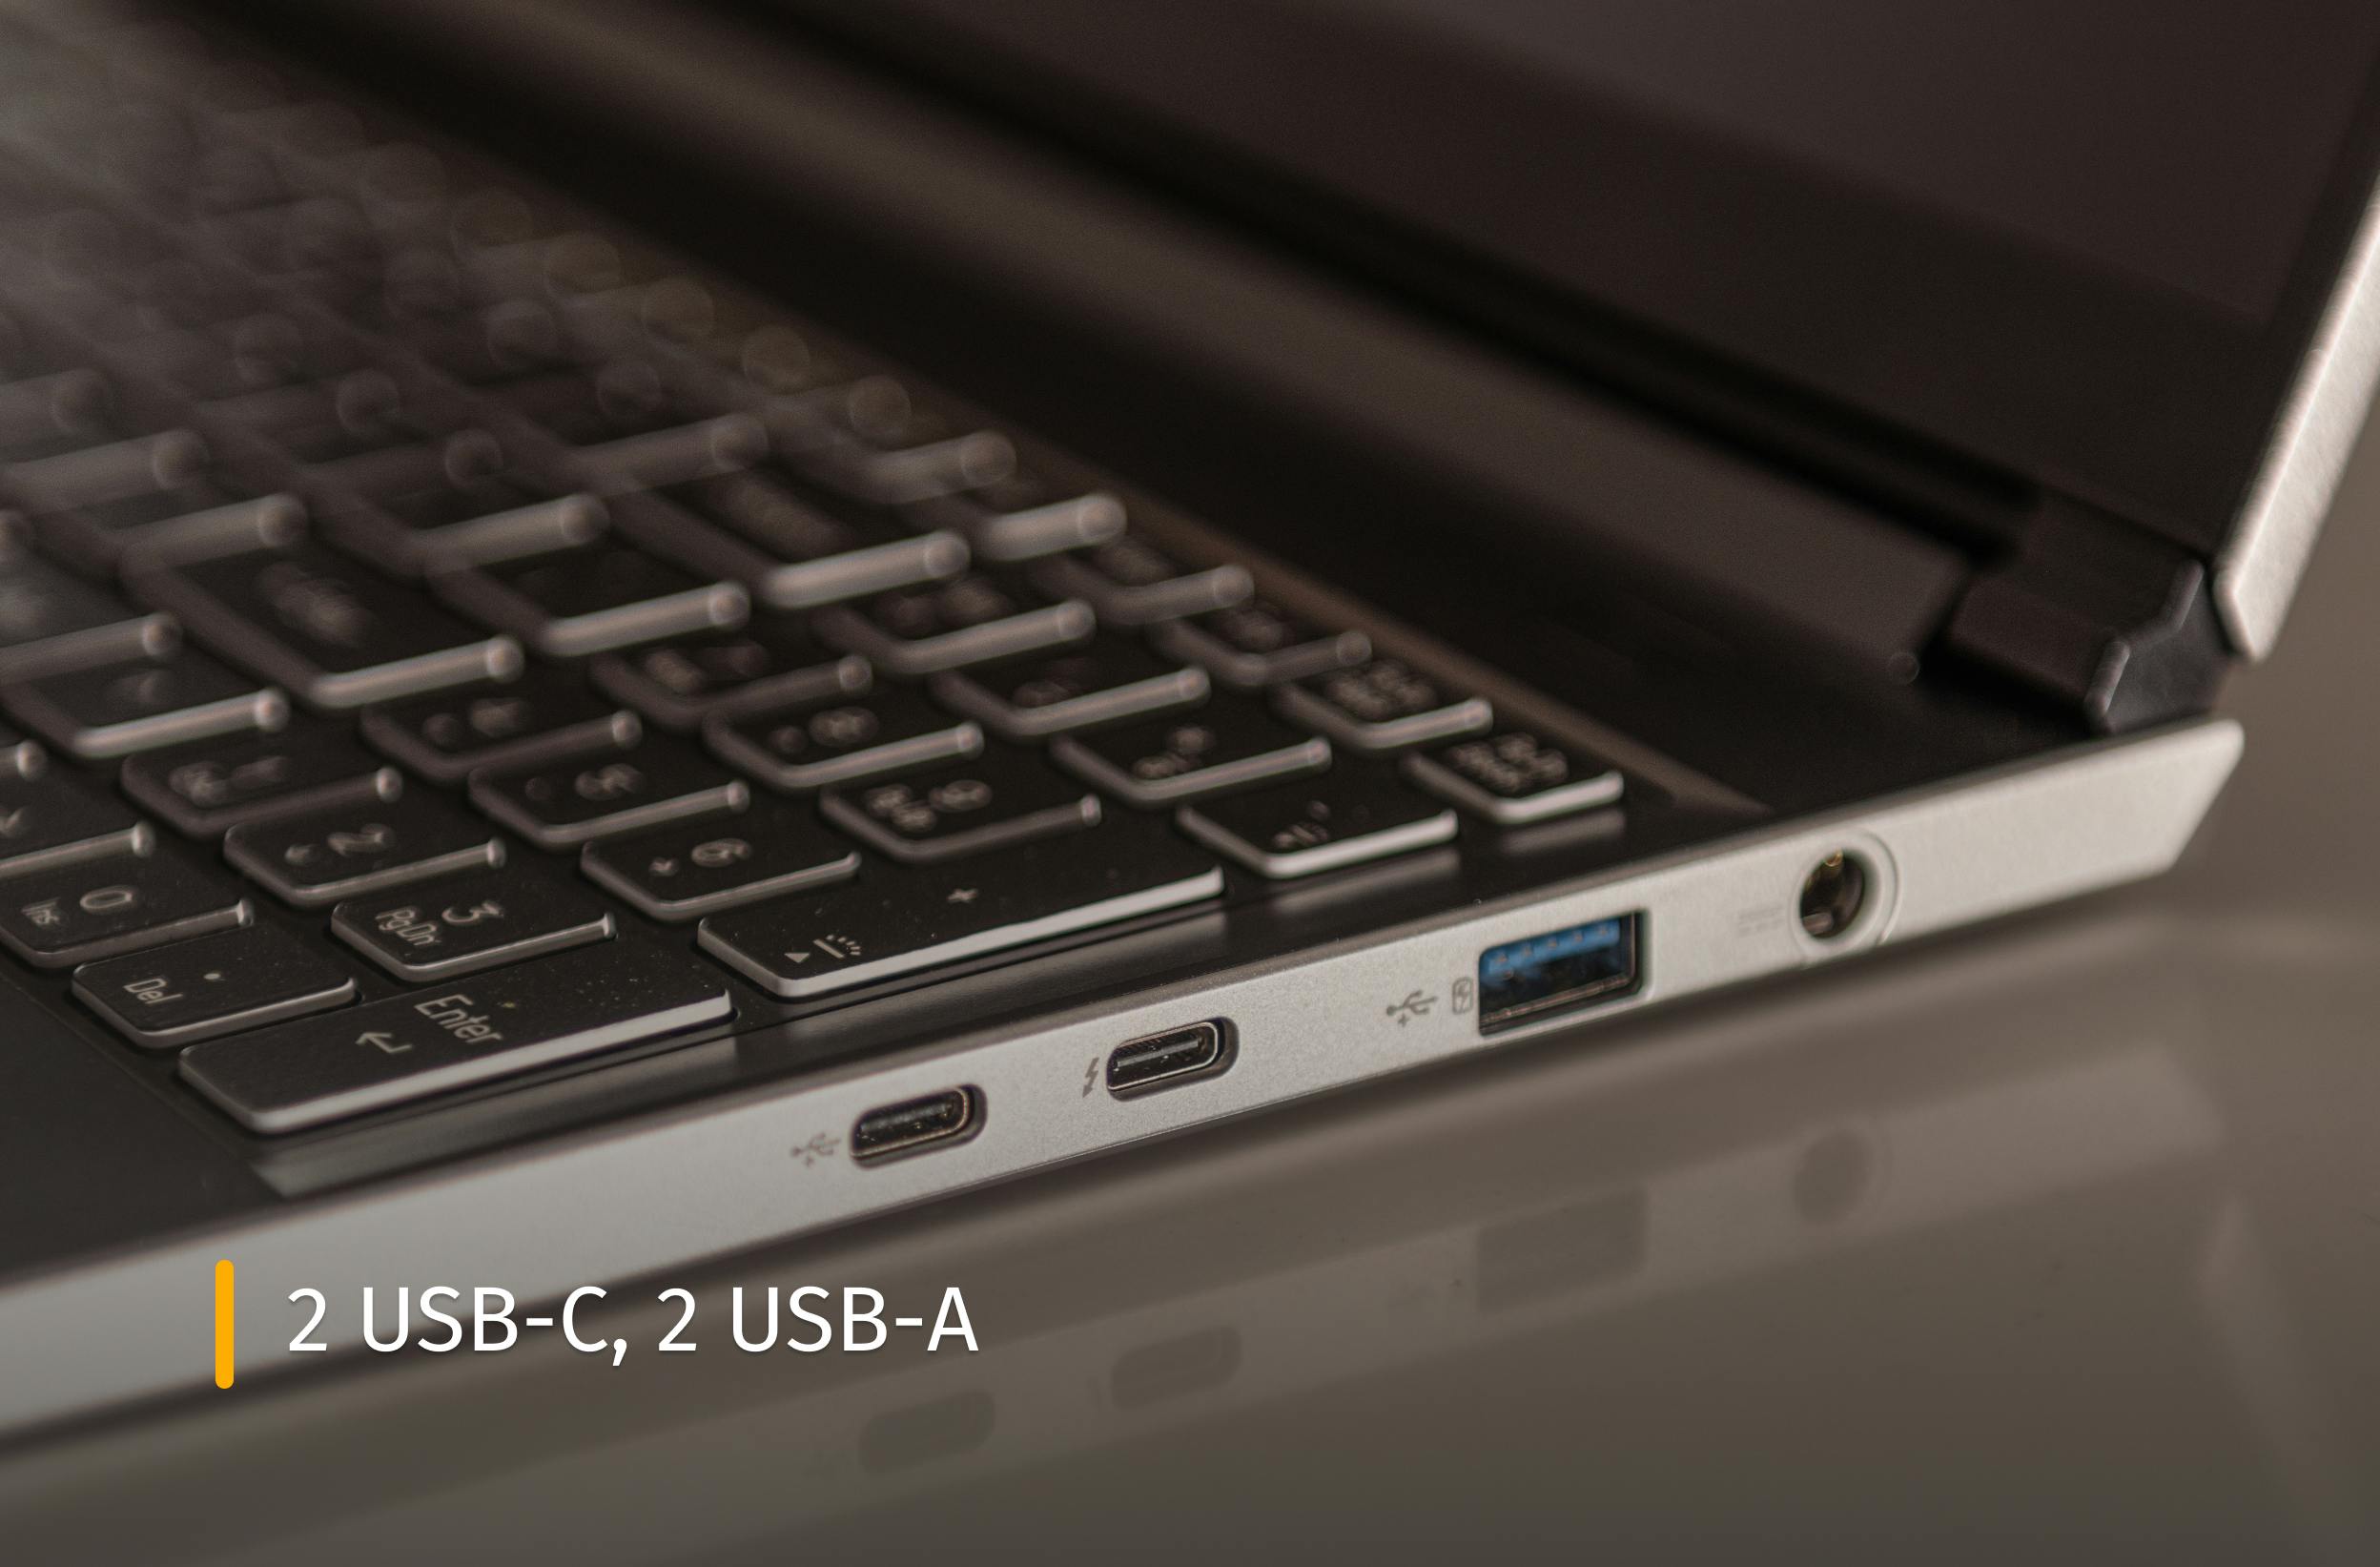 Darter Pro close up of ports with text that reads "2 USB-C, 2 USB-A"